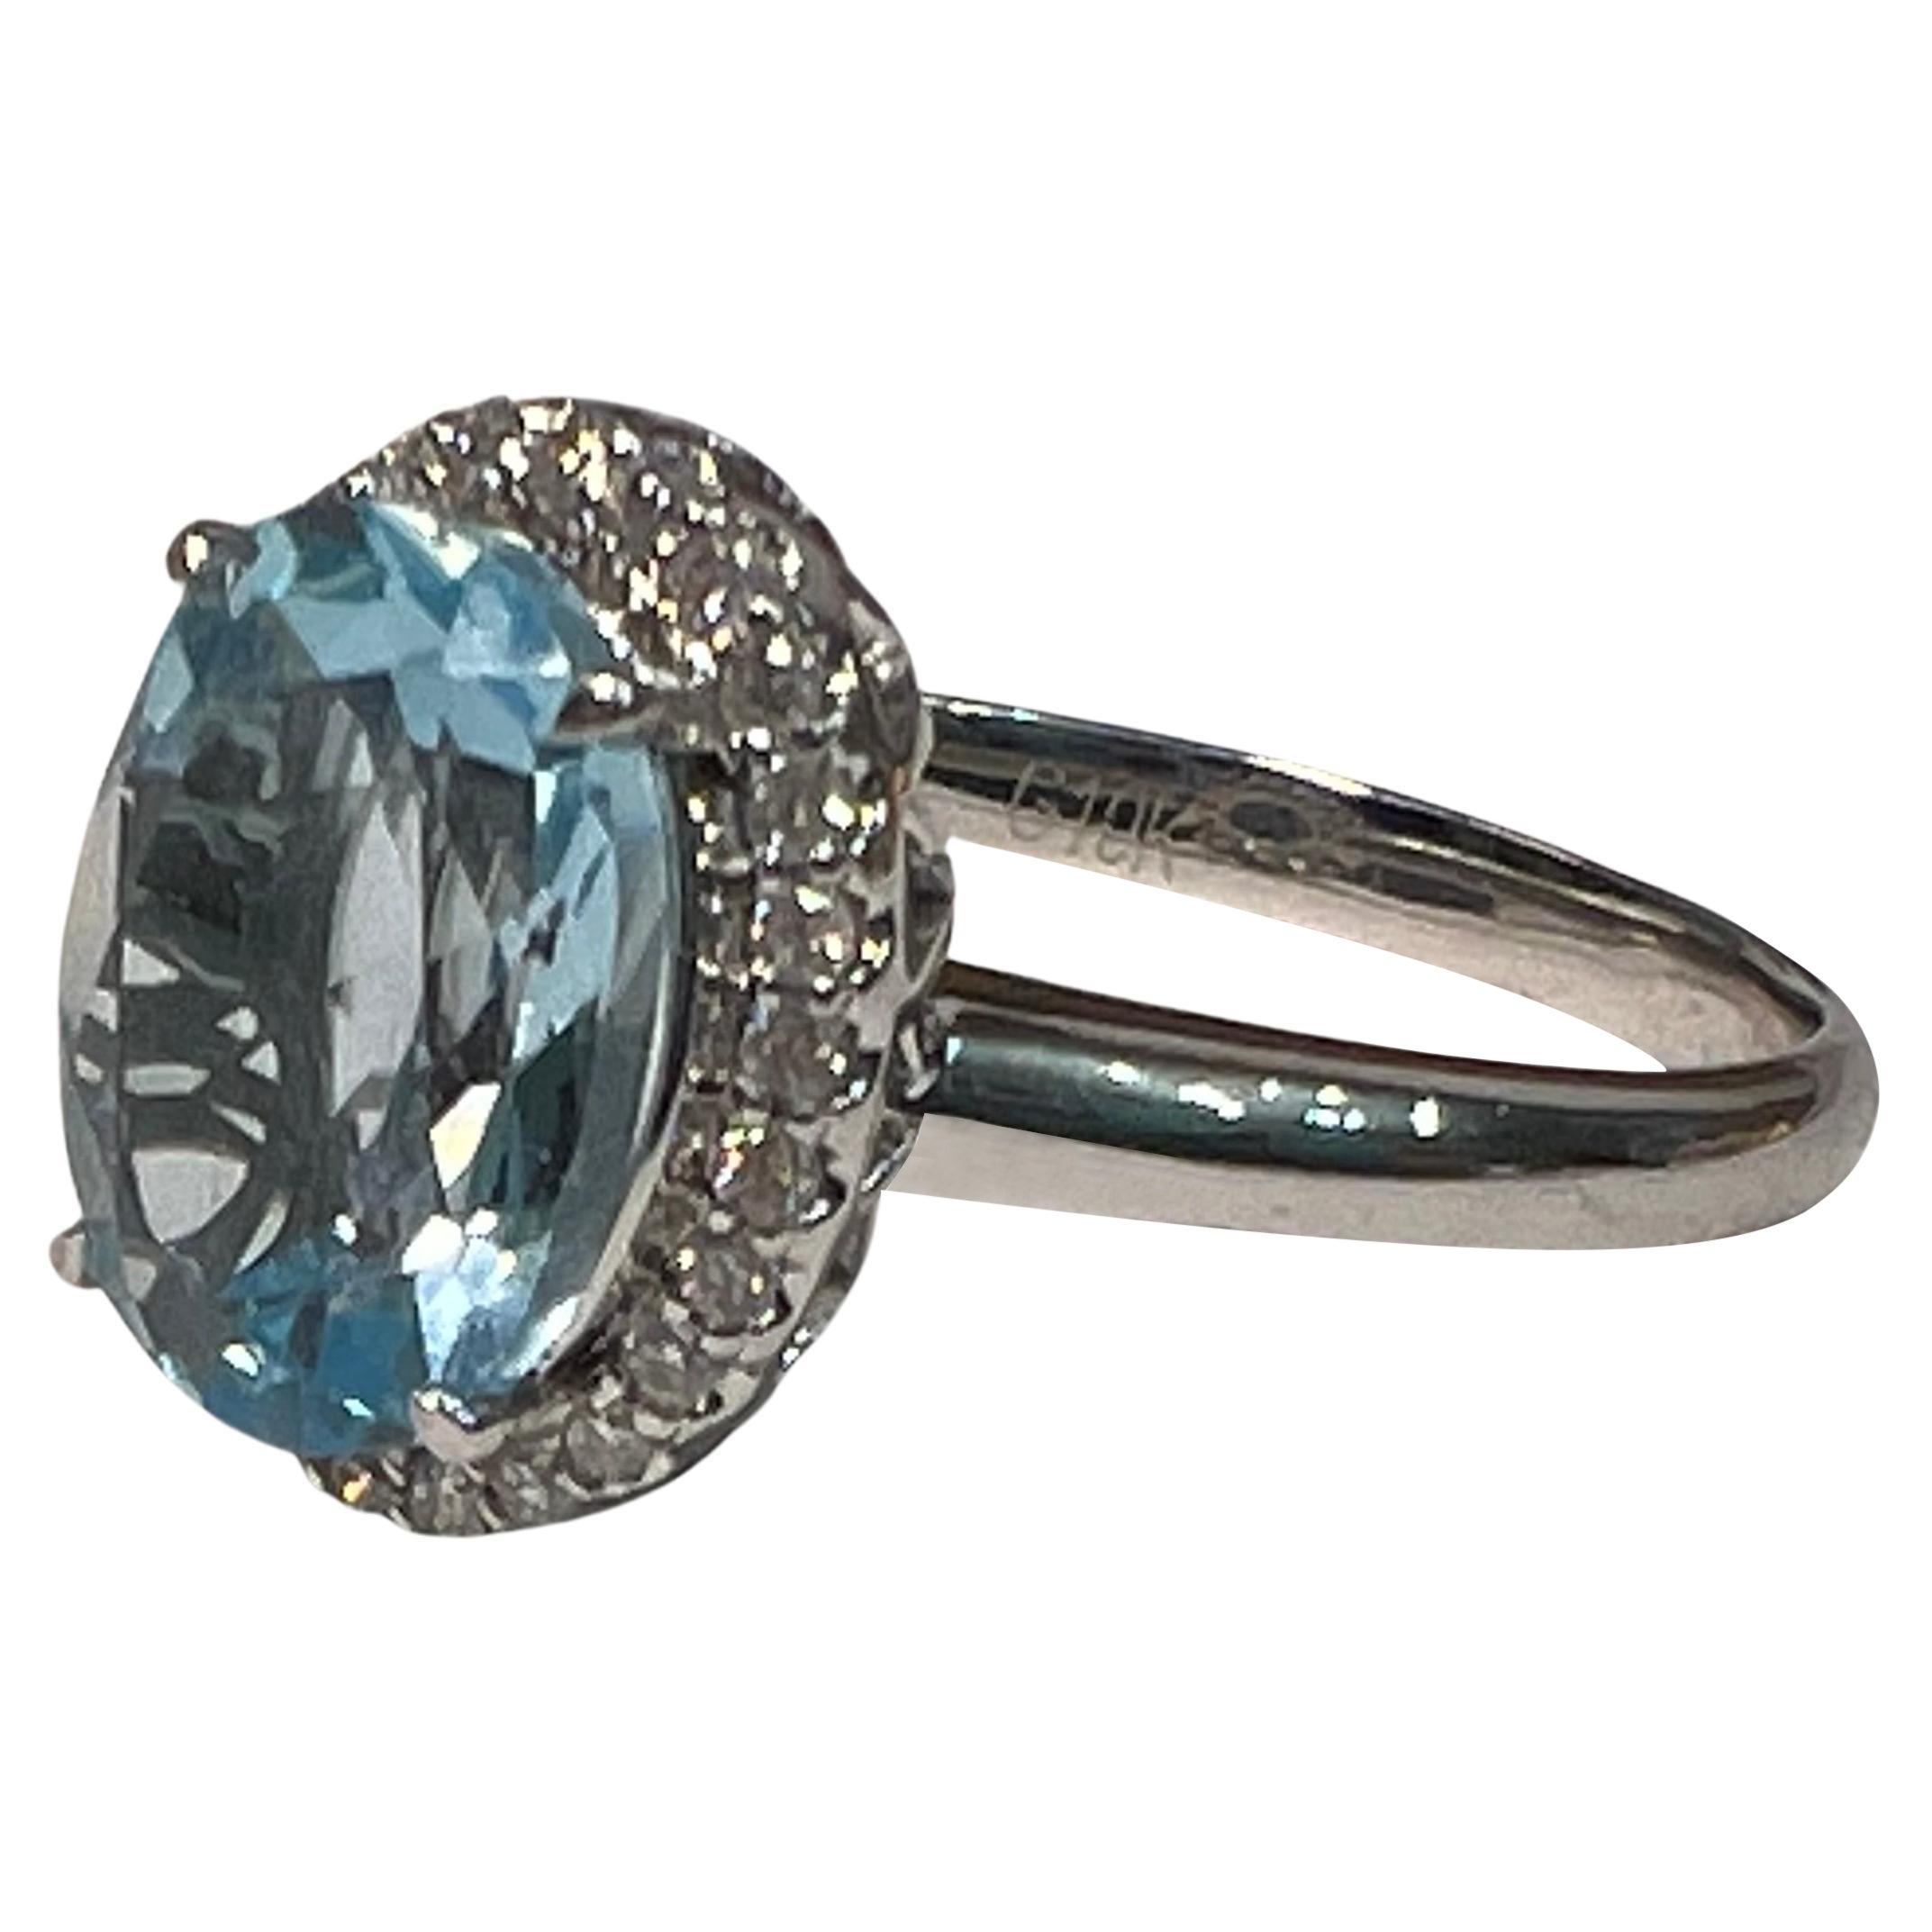 3.45ct Baby Blue Oval Topaz with .2ct halo of diamonds. Set in white 10k gold. 

This impressive piece is the perfect engagement ring or anniversary ring. The 3.45ct oval-shaped baby blue topaz is rose cut to enhance the shine and lure of this